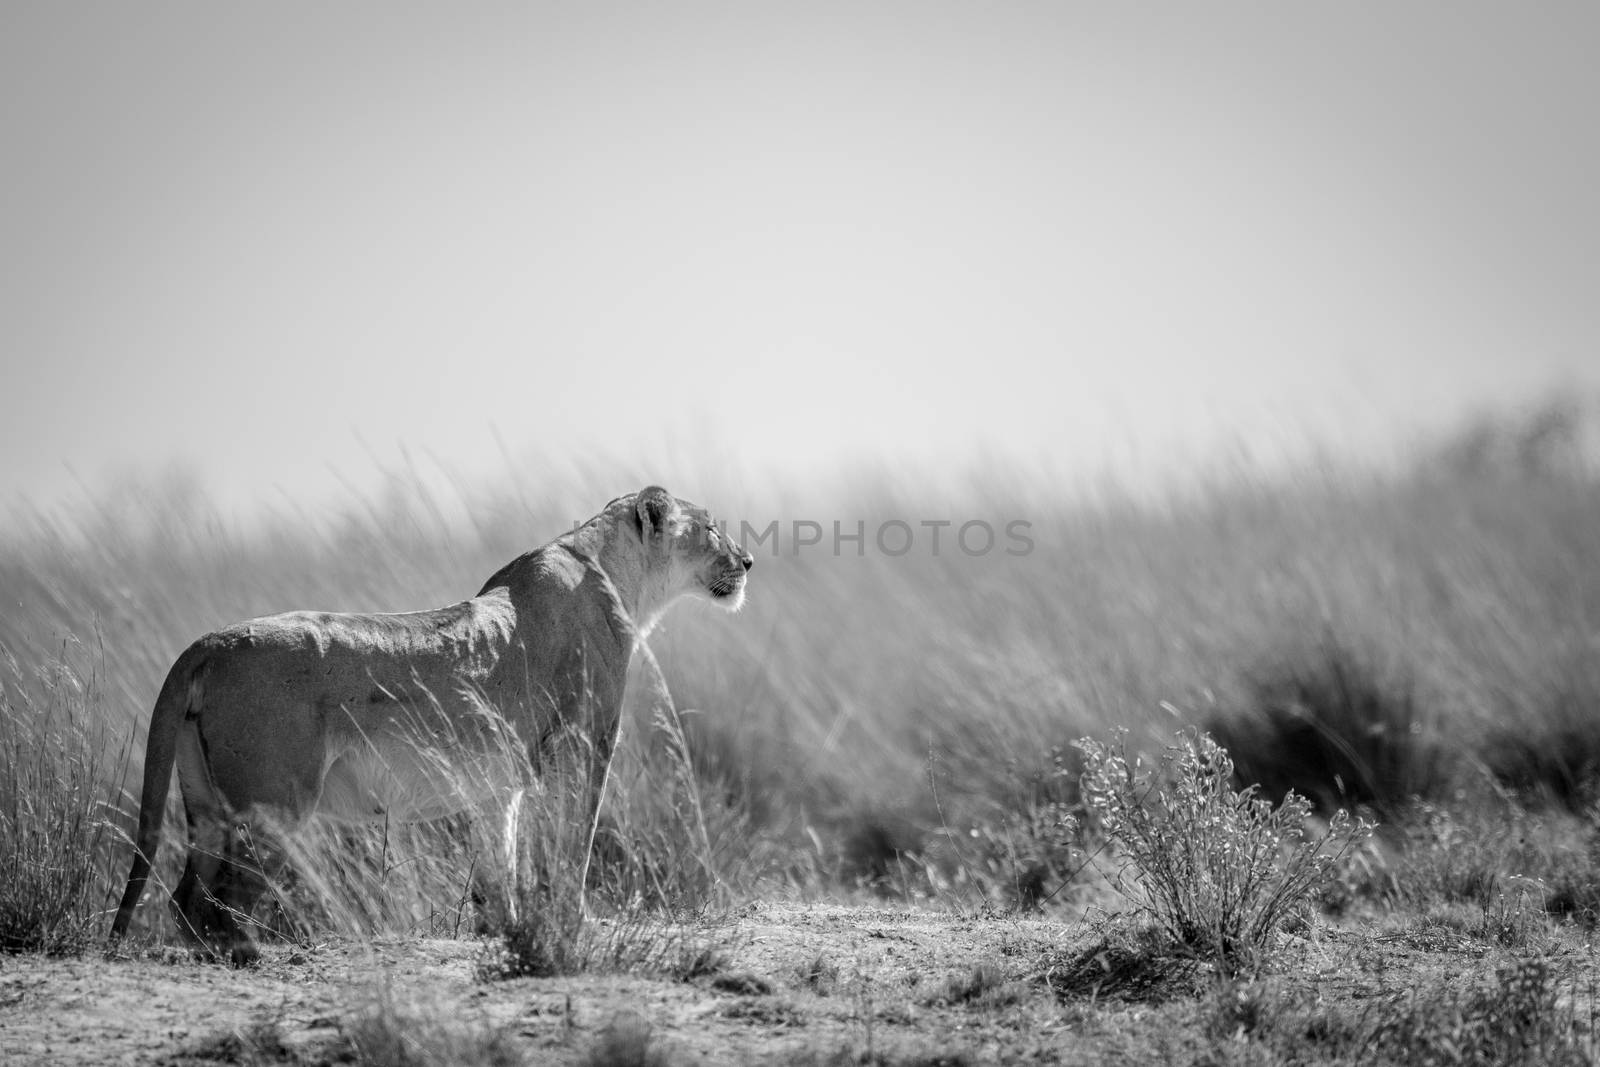 Lioness standing in the grass and scanning the surroundings in black and white in the Welgevonden game reserve, South Africa.